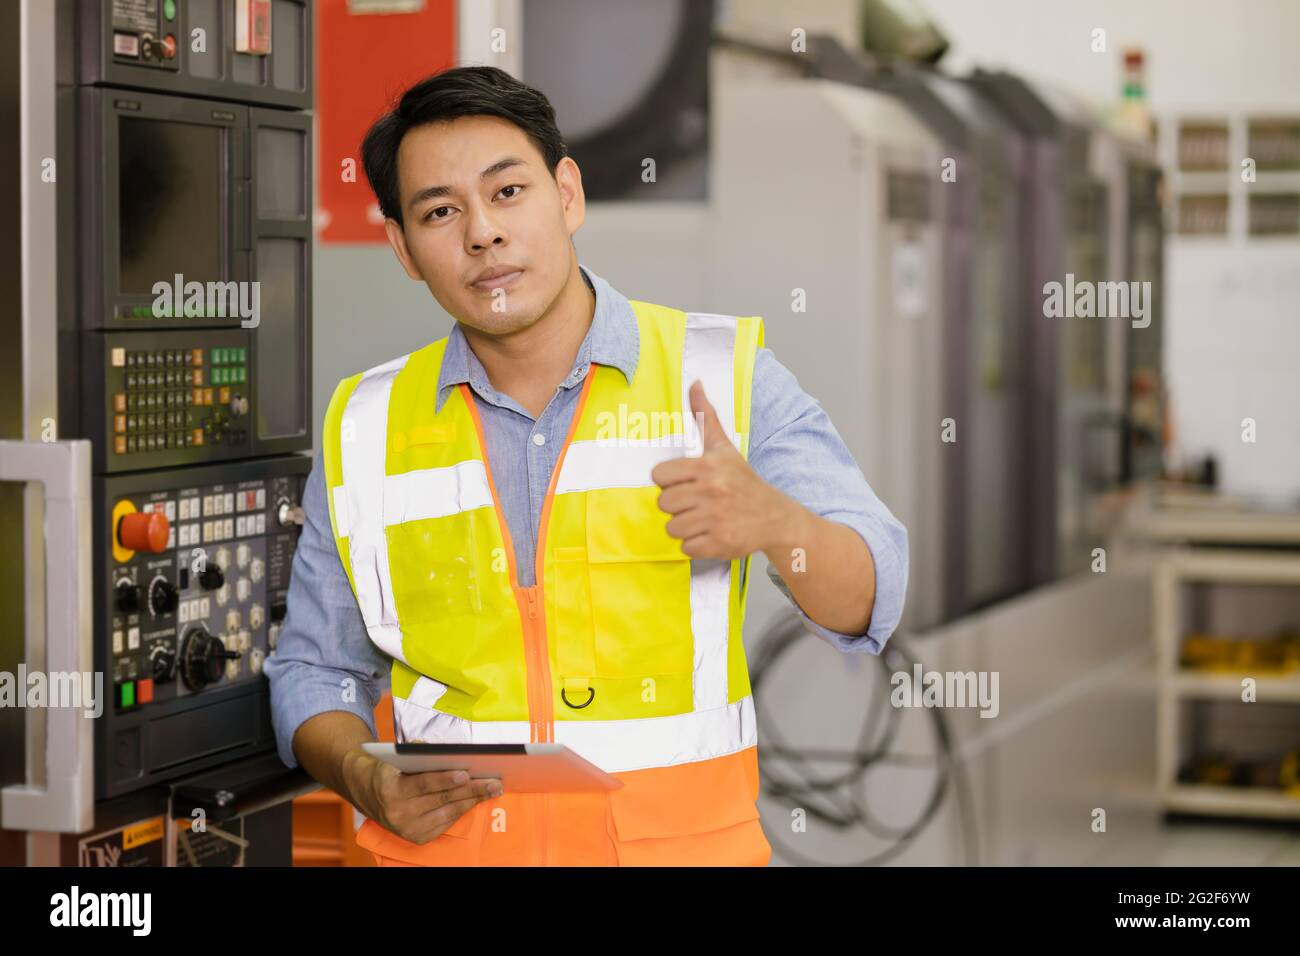 Portrait smart Asian adult professional engineer worker in factory industry CNC operator standing confident thumbs up with safety suit. Stock Photo